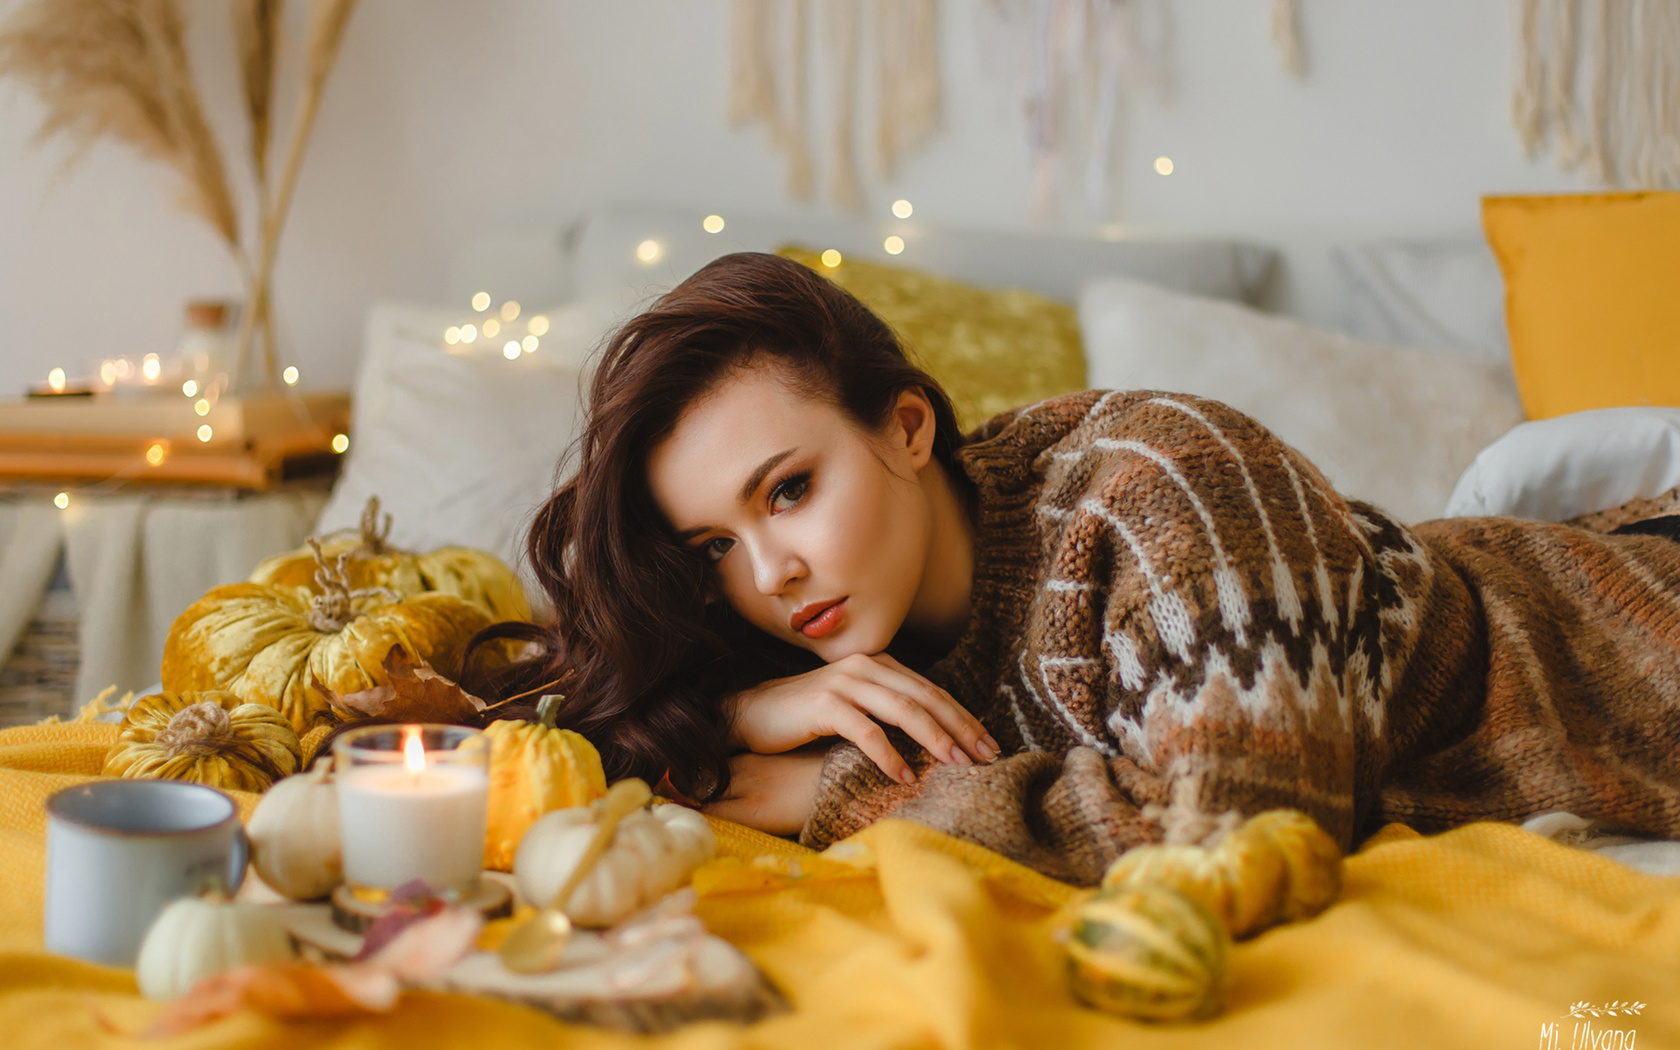 women, portrait, bokeh, candles, in bed, make up, sweater, pillow, red lipstick